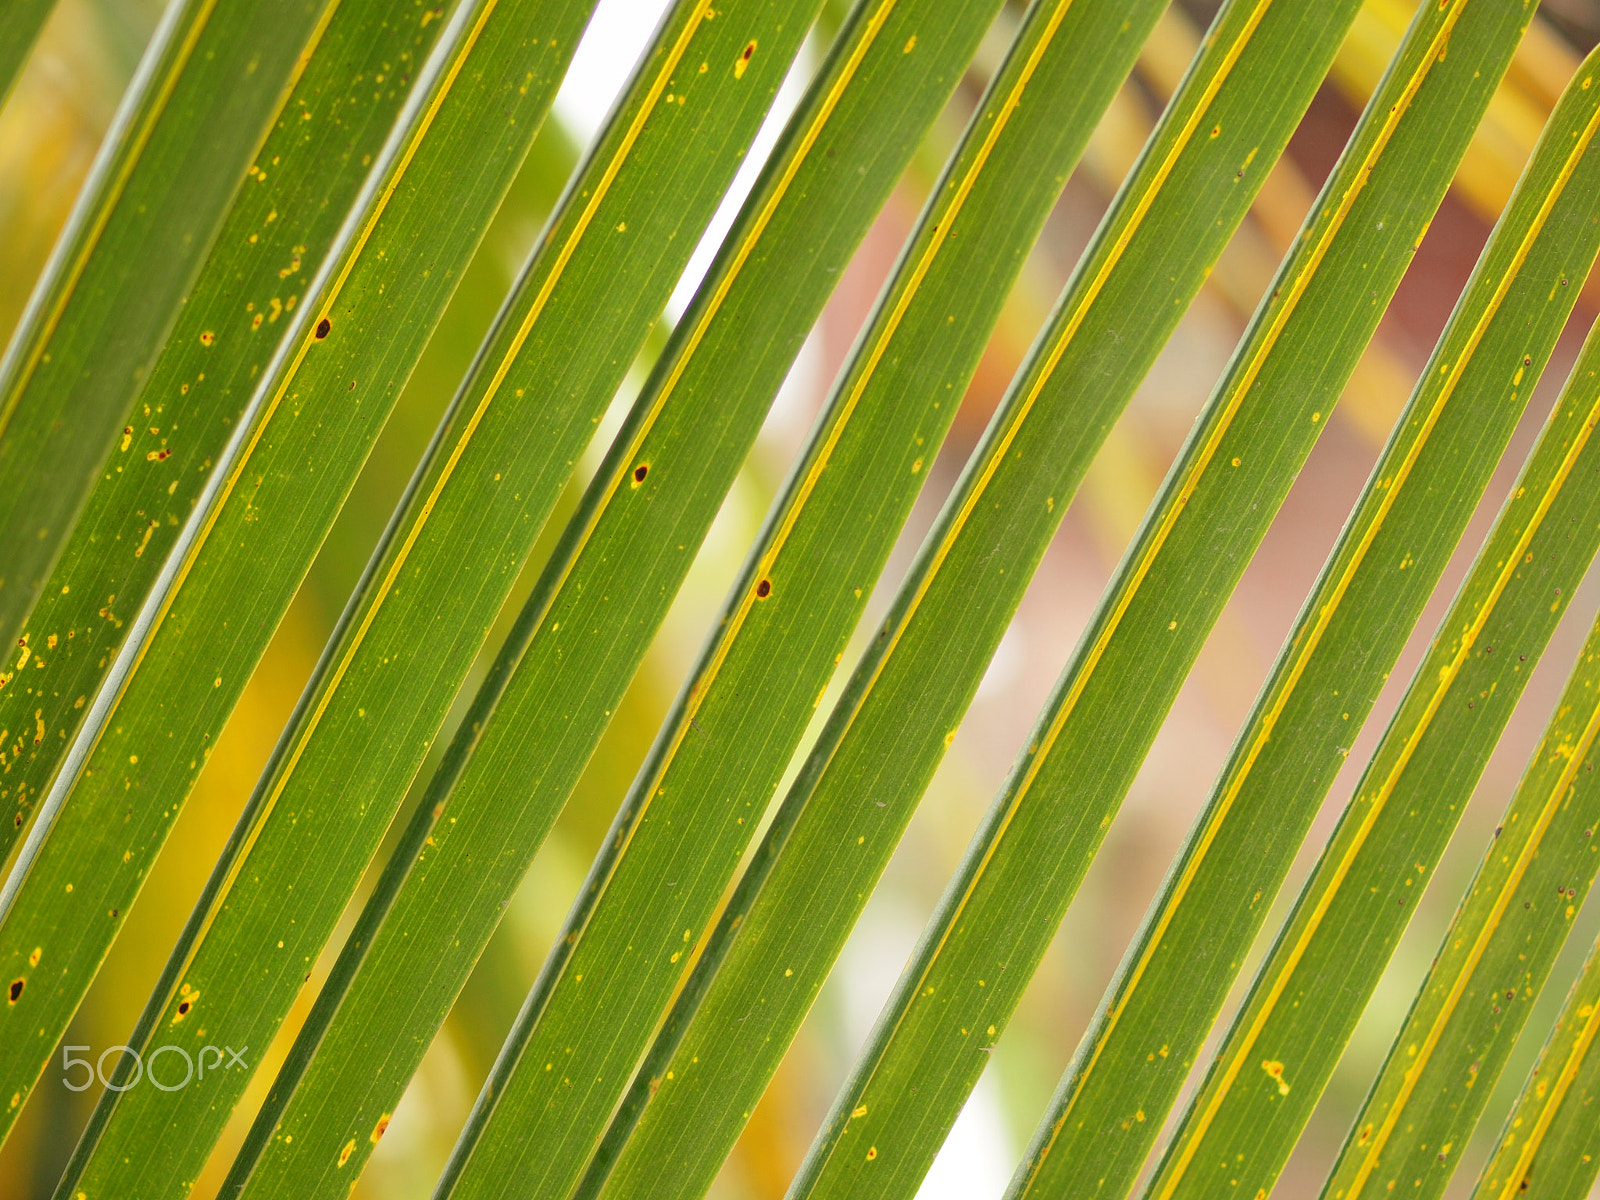 Olympus E-620 (EVOLT E-620) sample photo. Coconut leaf in pattern photography